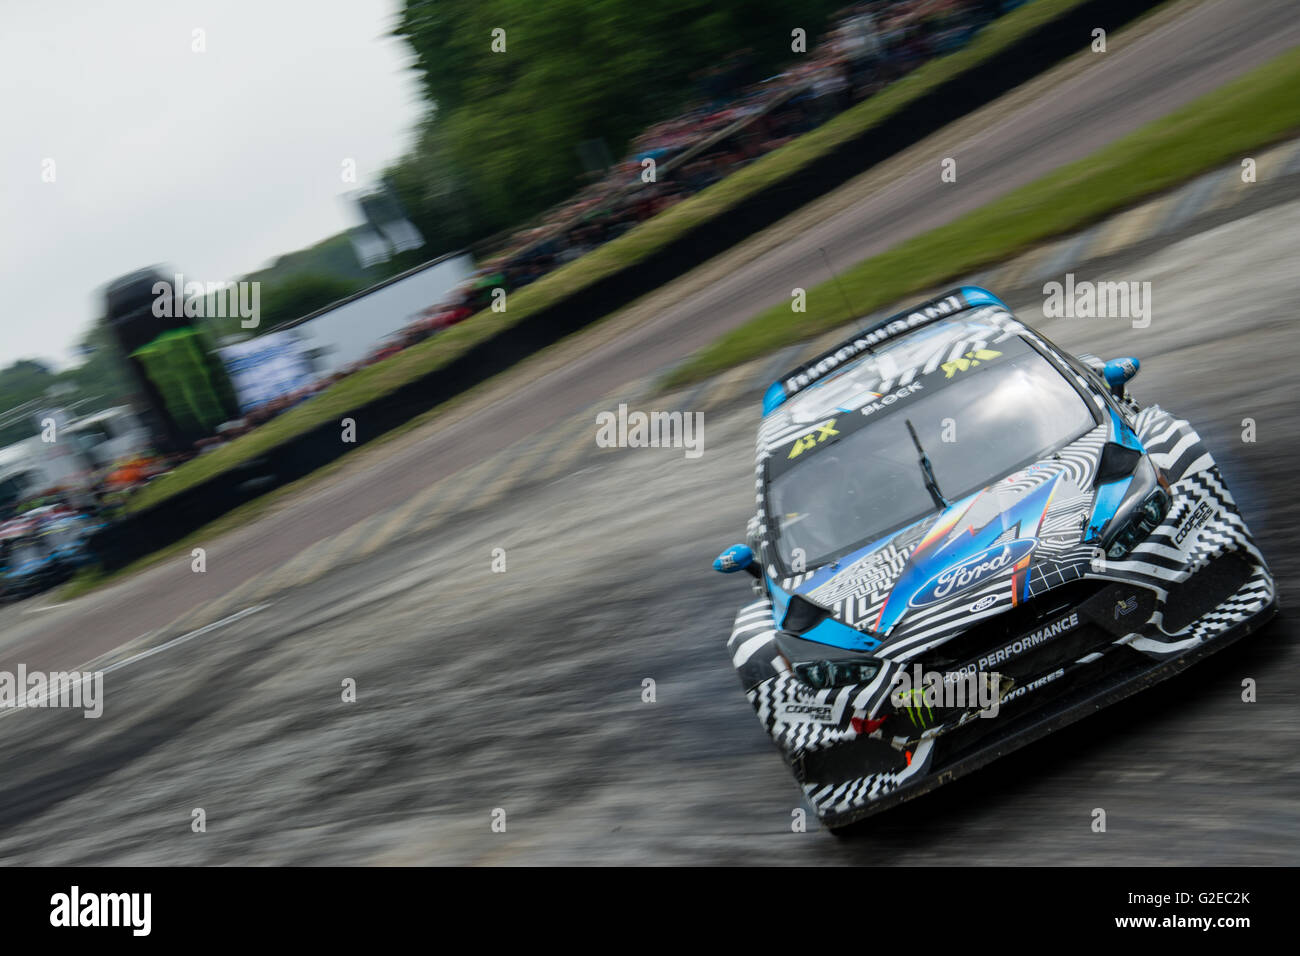 Lydden Hill, Kent, UK. 29th May, 2016. Rallycross driver Ken Block (USA) and Hoonigan acing Division (USA) drives during Qualifying for FIA World Rallycross at Lydden Hill Circuit  (Photo by Gergo Toth / Alamy Live News) Stock Photo